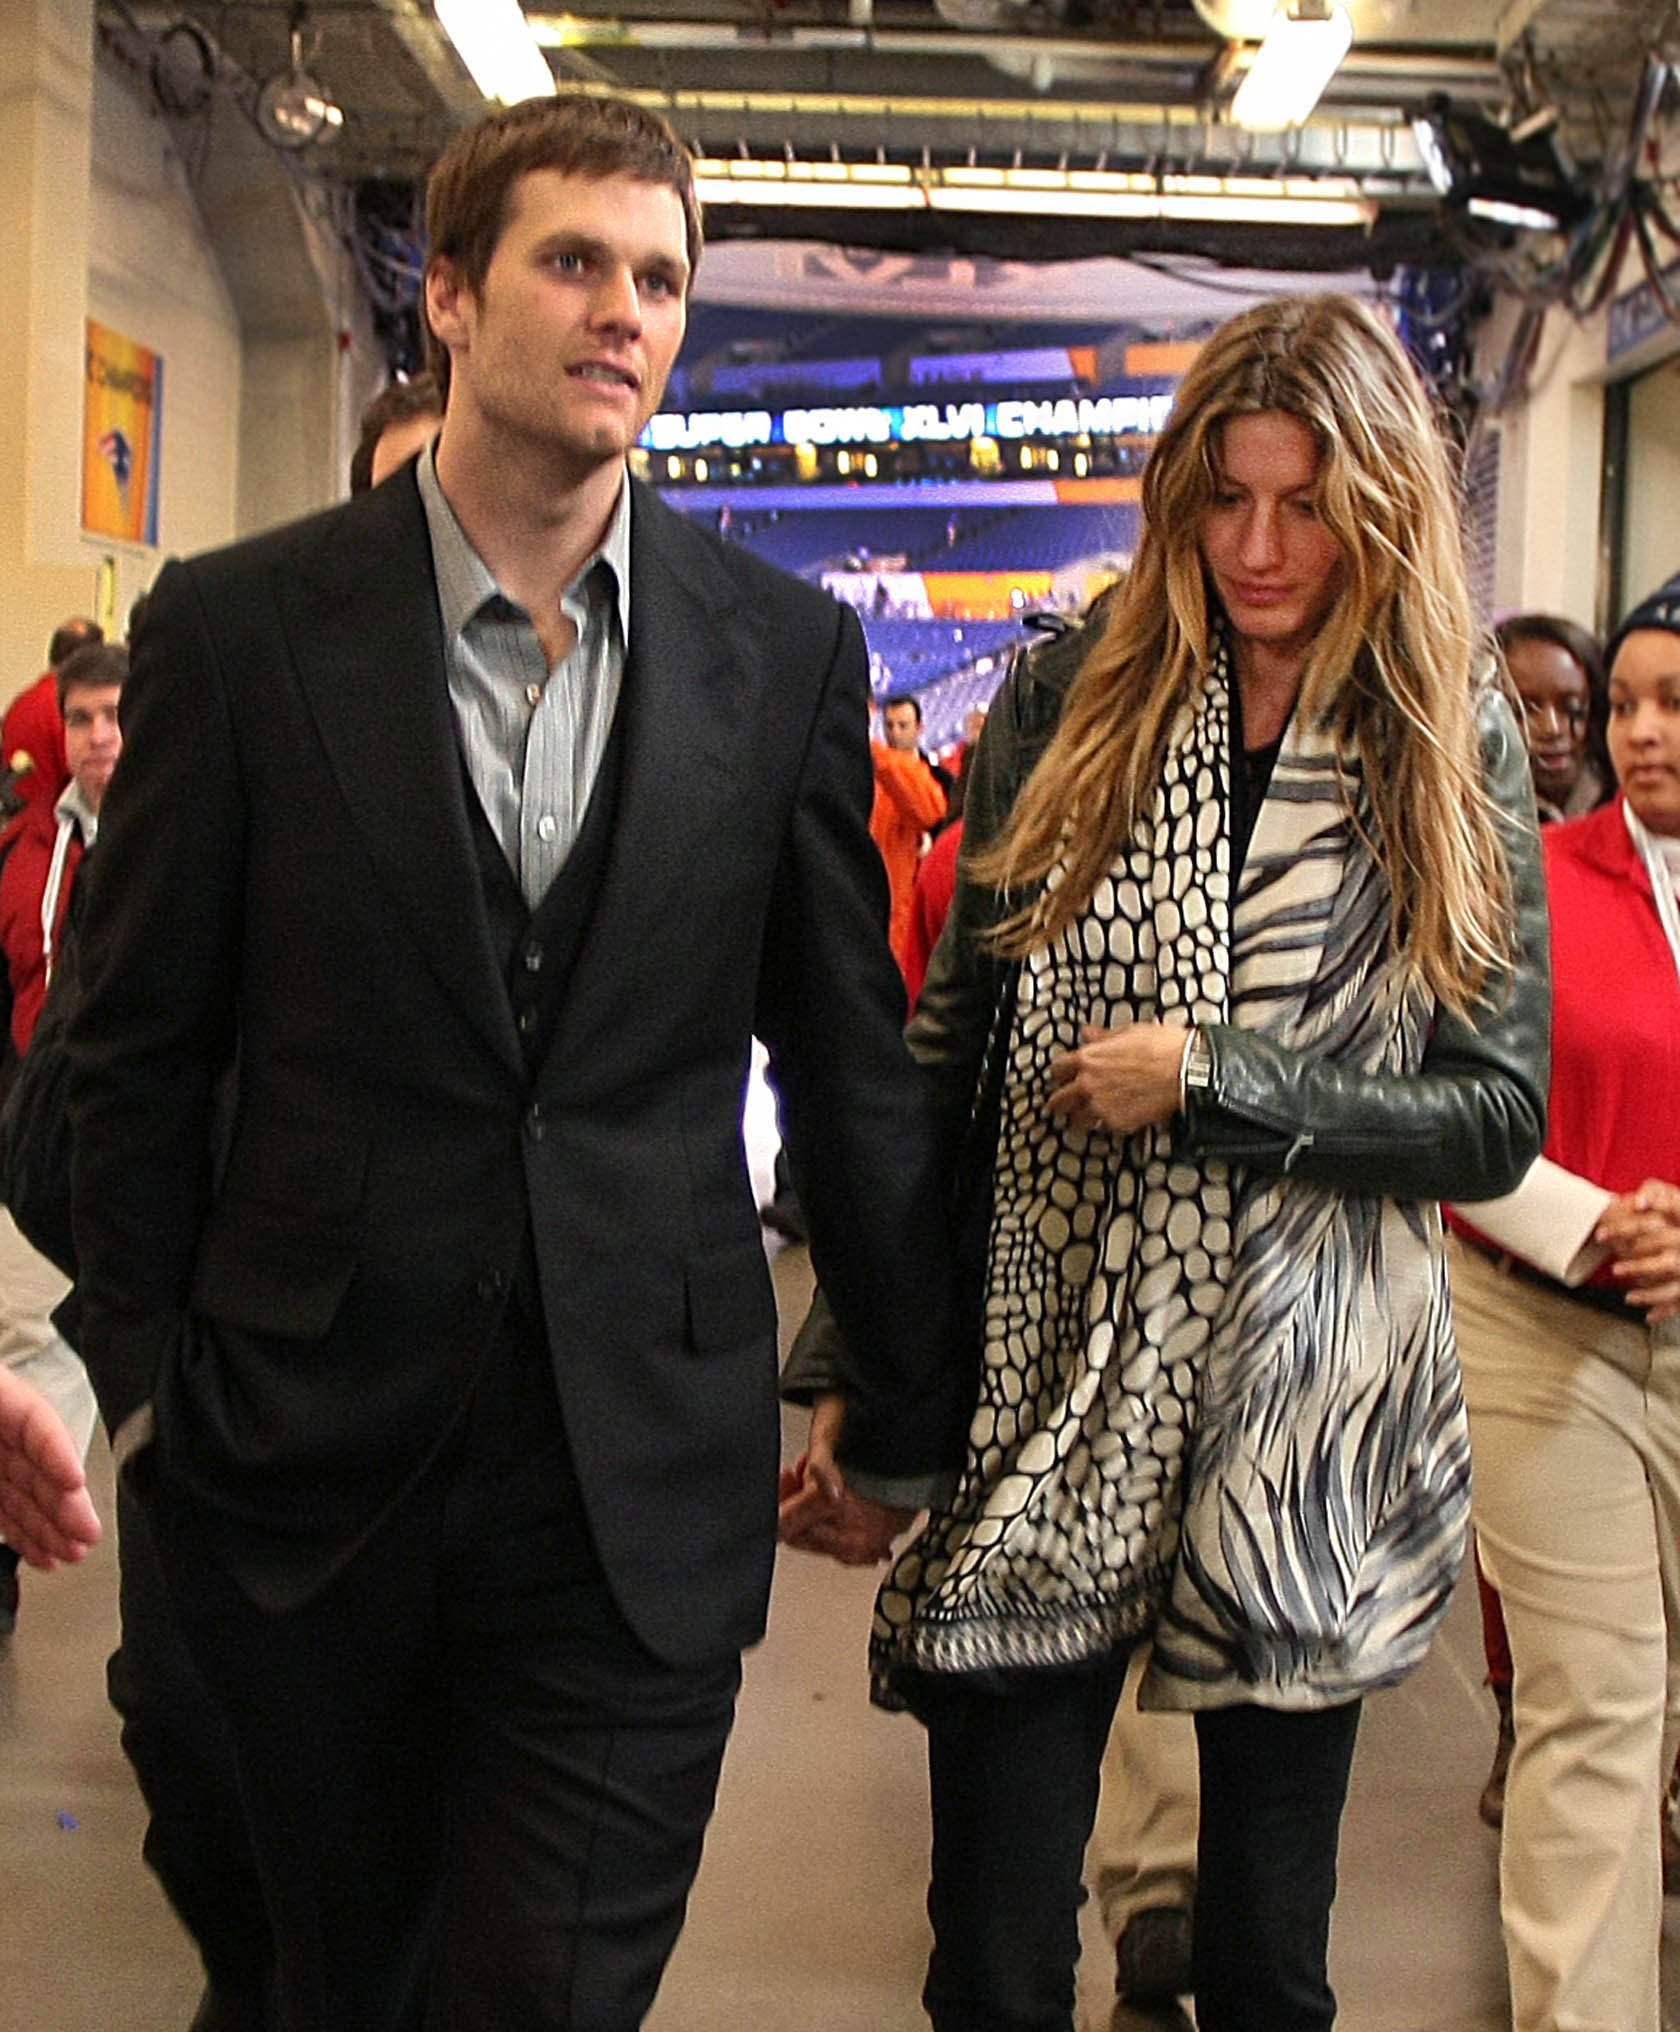 Tom Brady walks from a press conference at the end of the Super Bowl with wife, Giselle. | Source: Getty Images